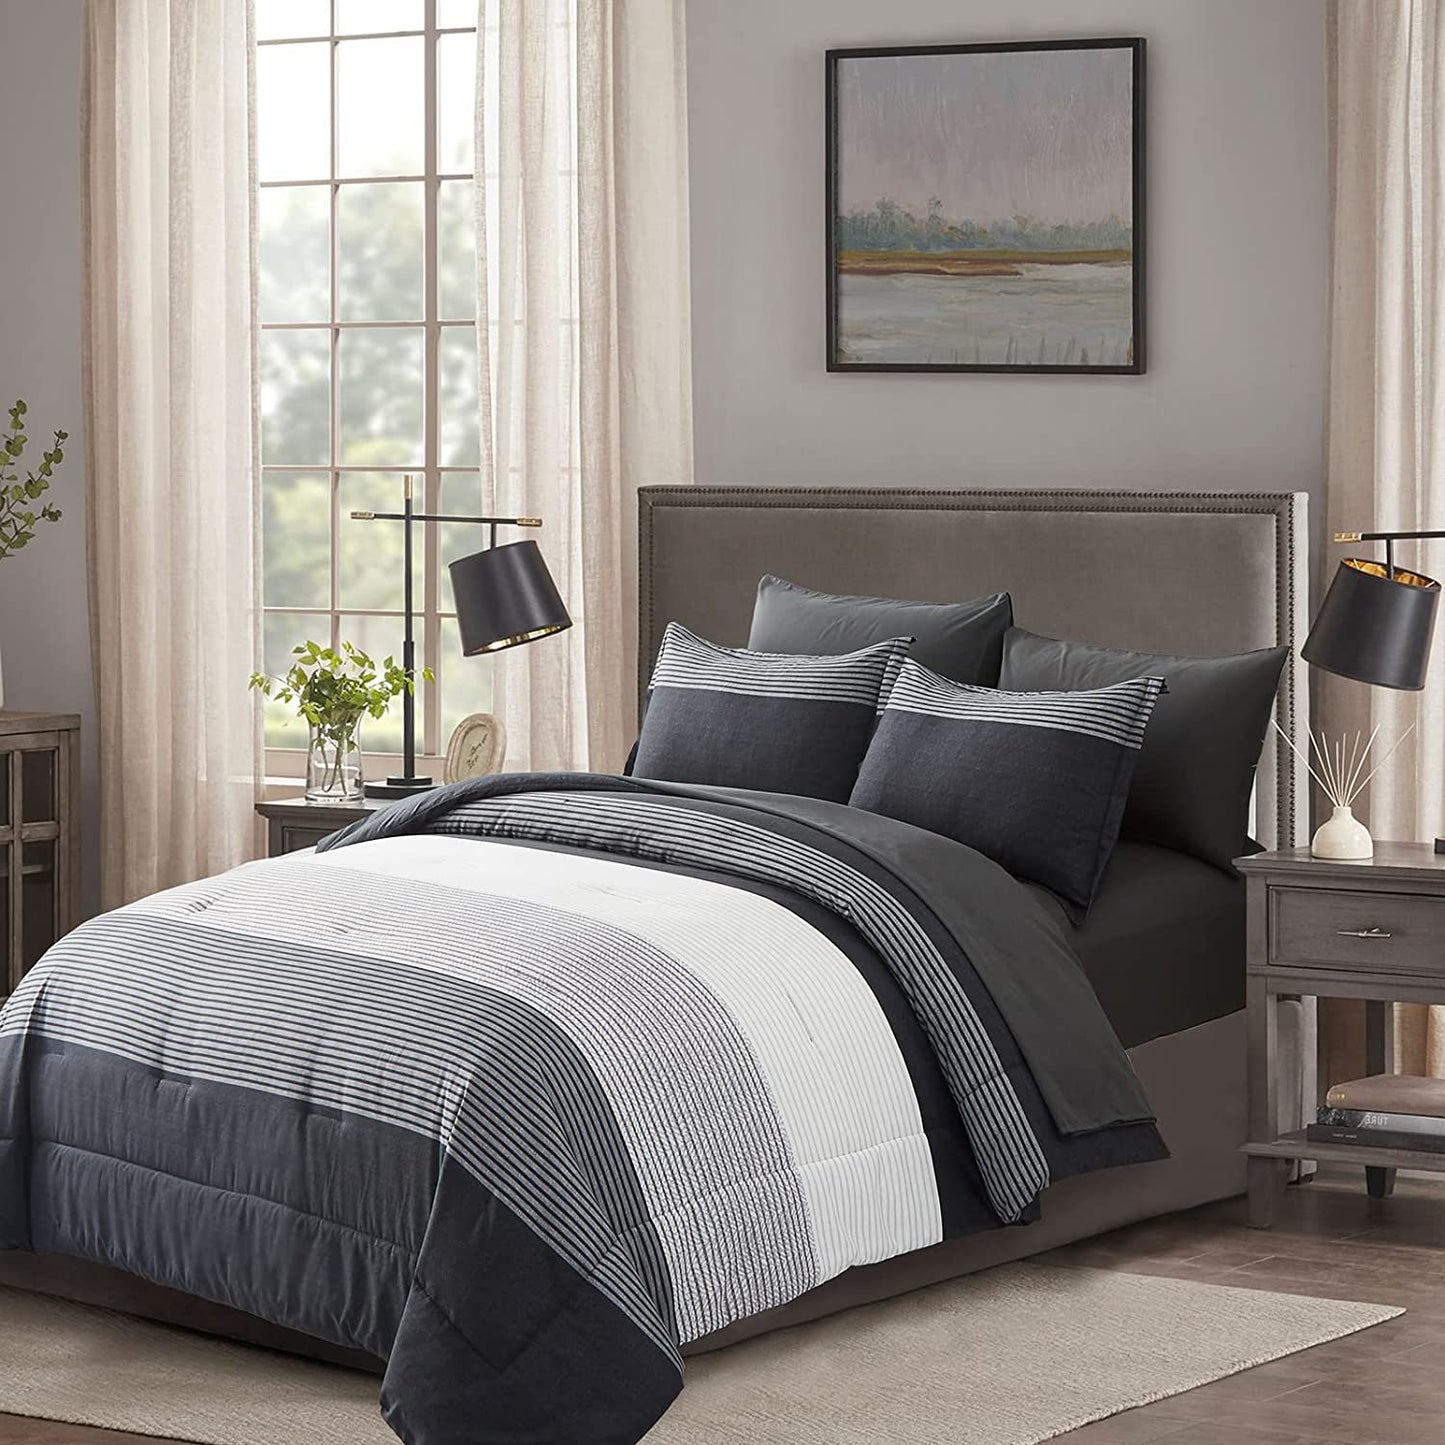 Dark Grey Queen Comforter Set 7 Pieces Stripe Comforter Sets with Comforter, Pillowshams, Flat Sheet, Fitted Sheet and Pillowcases